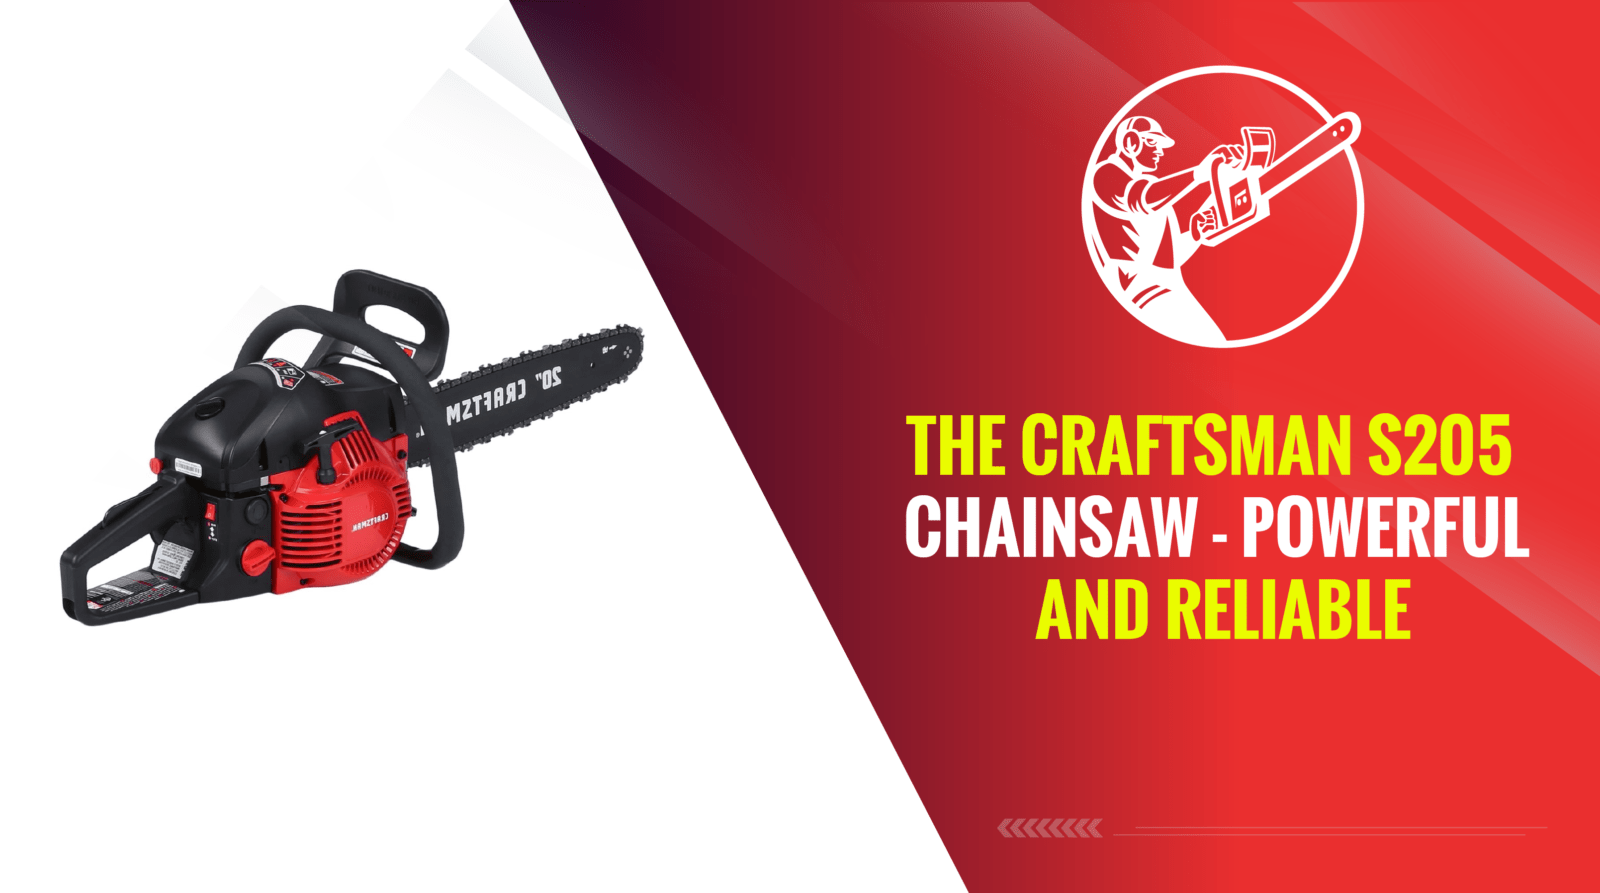 The Craftsman s205 Chainsaw 2023 – Powerful and Reliable